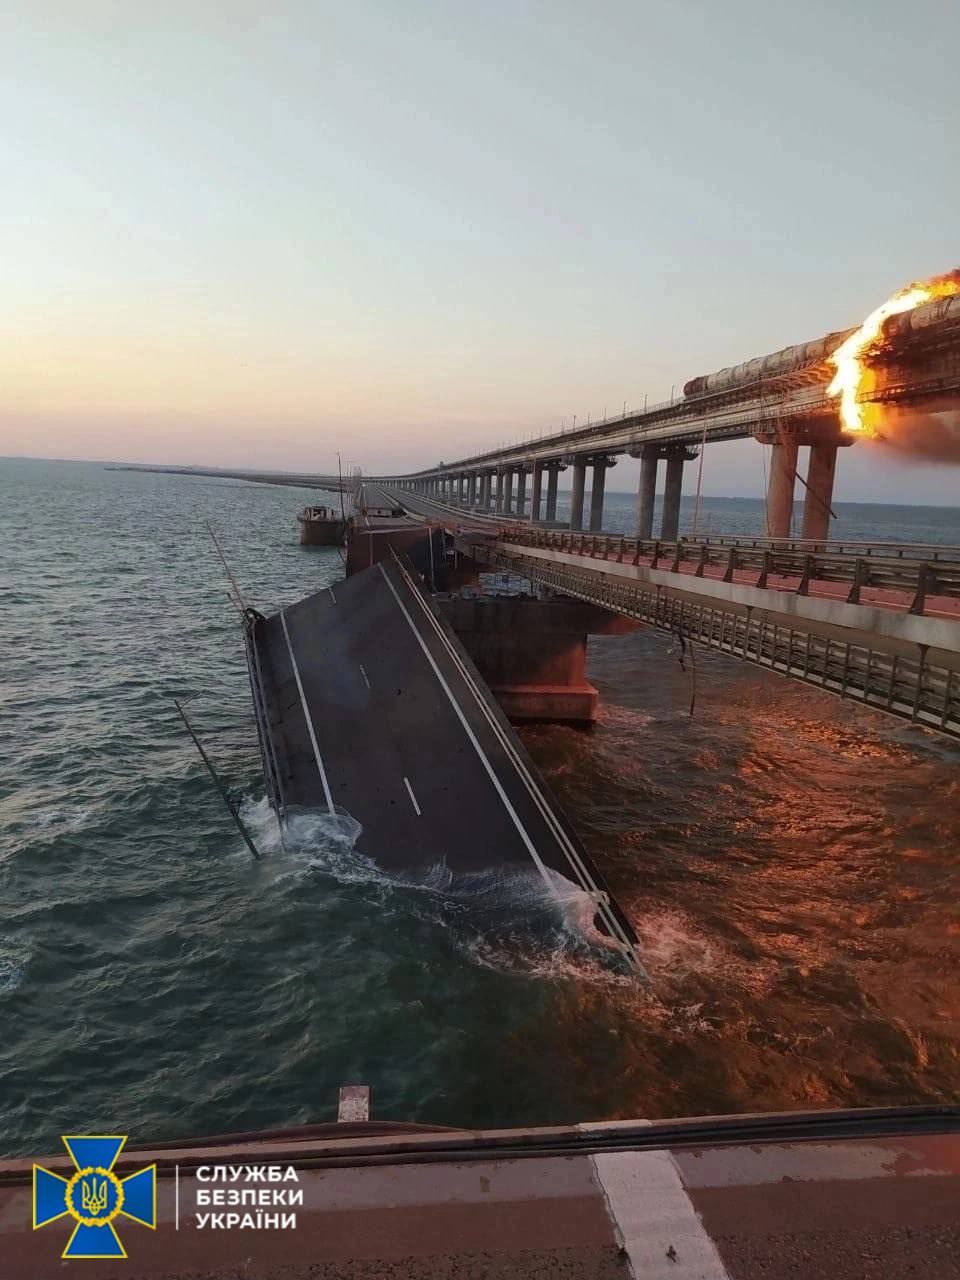 Explosion causes fire at the Kerch bridge.